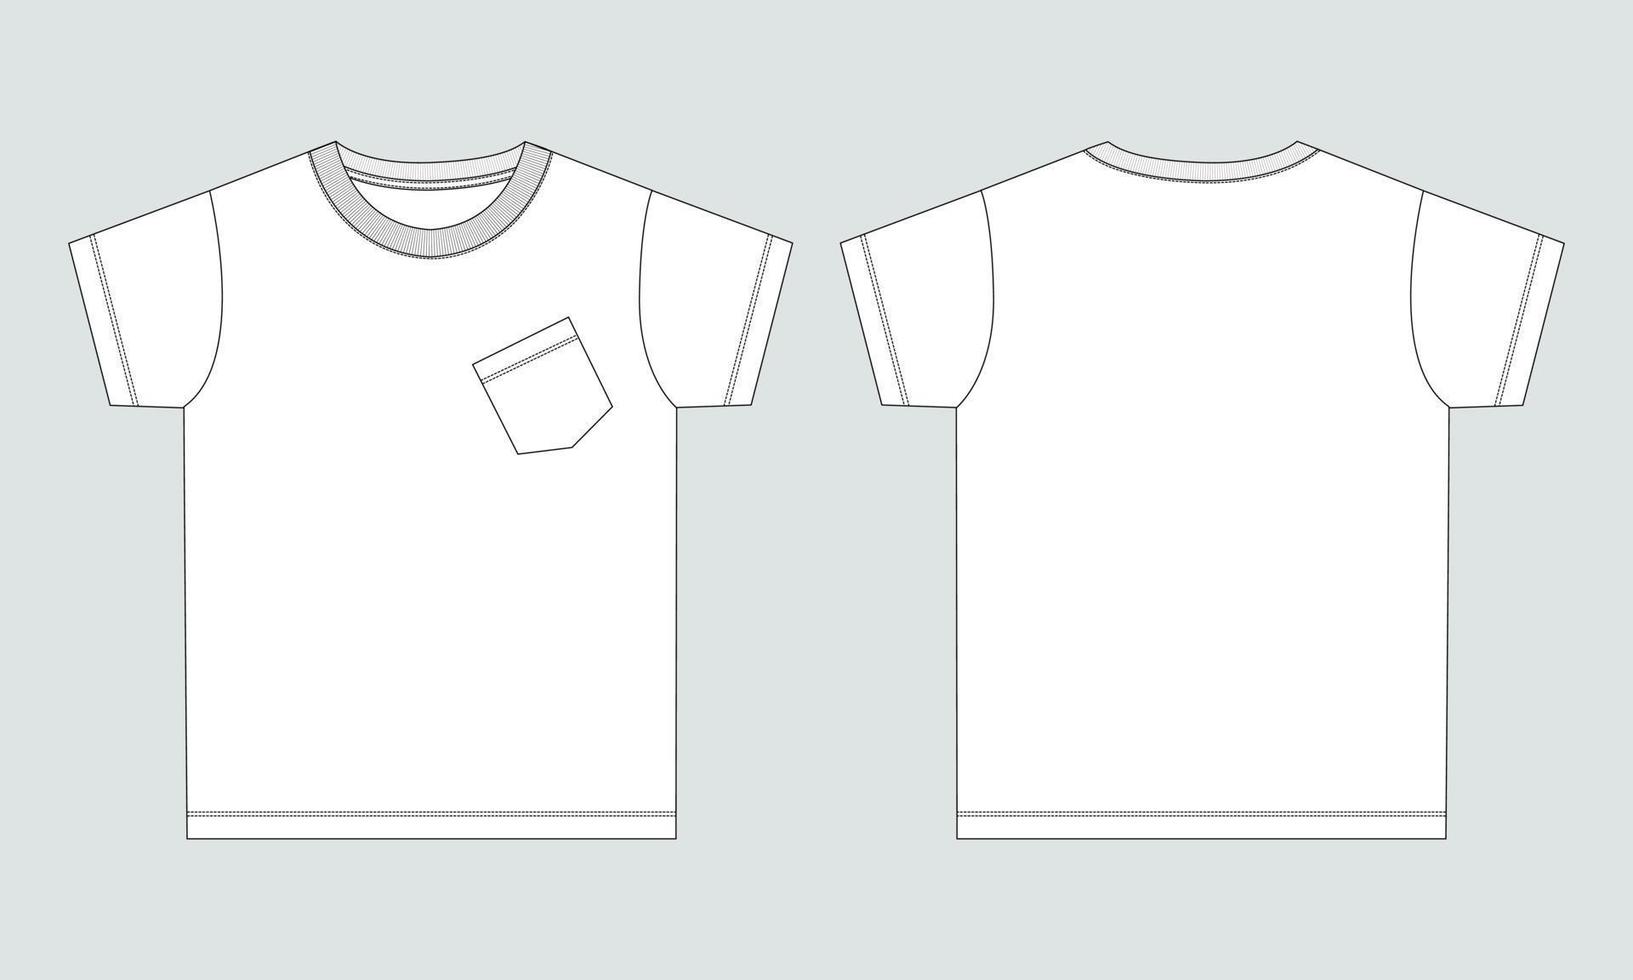 Short sleeve T shirt shirt Technical Fashion flat sketch vector illustration template front and back views. Clothing design mock up for baby boys isolated on grey background.